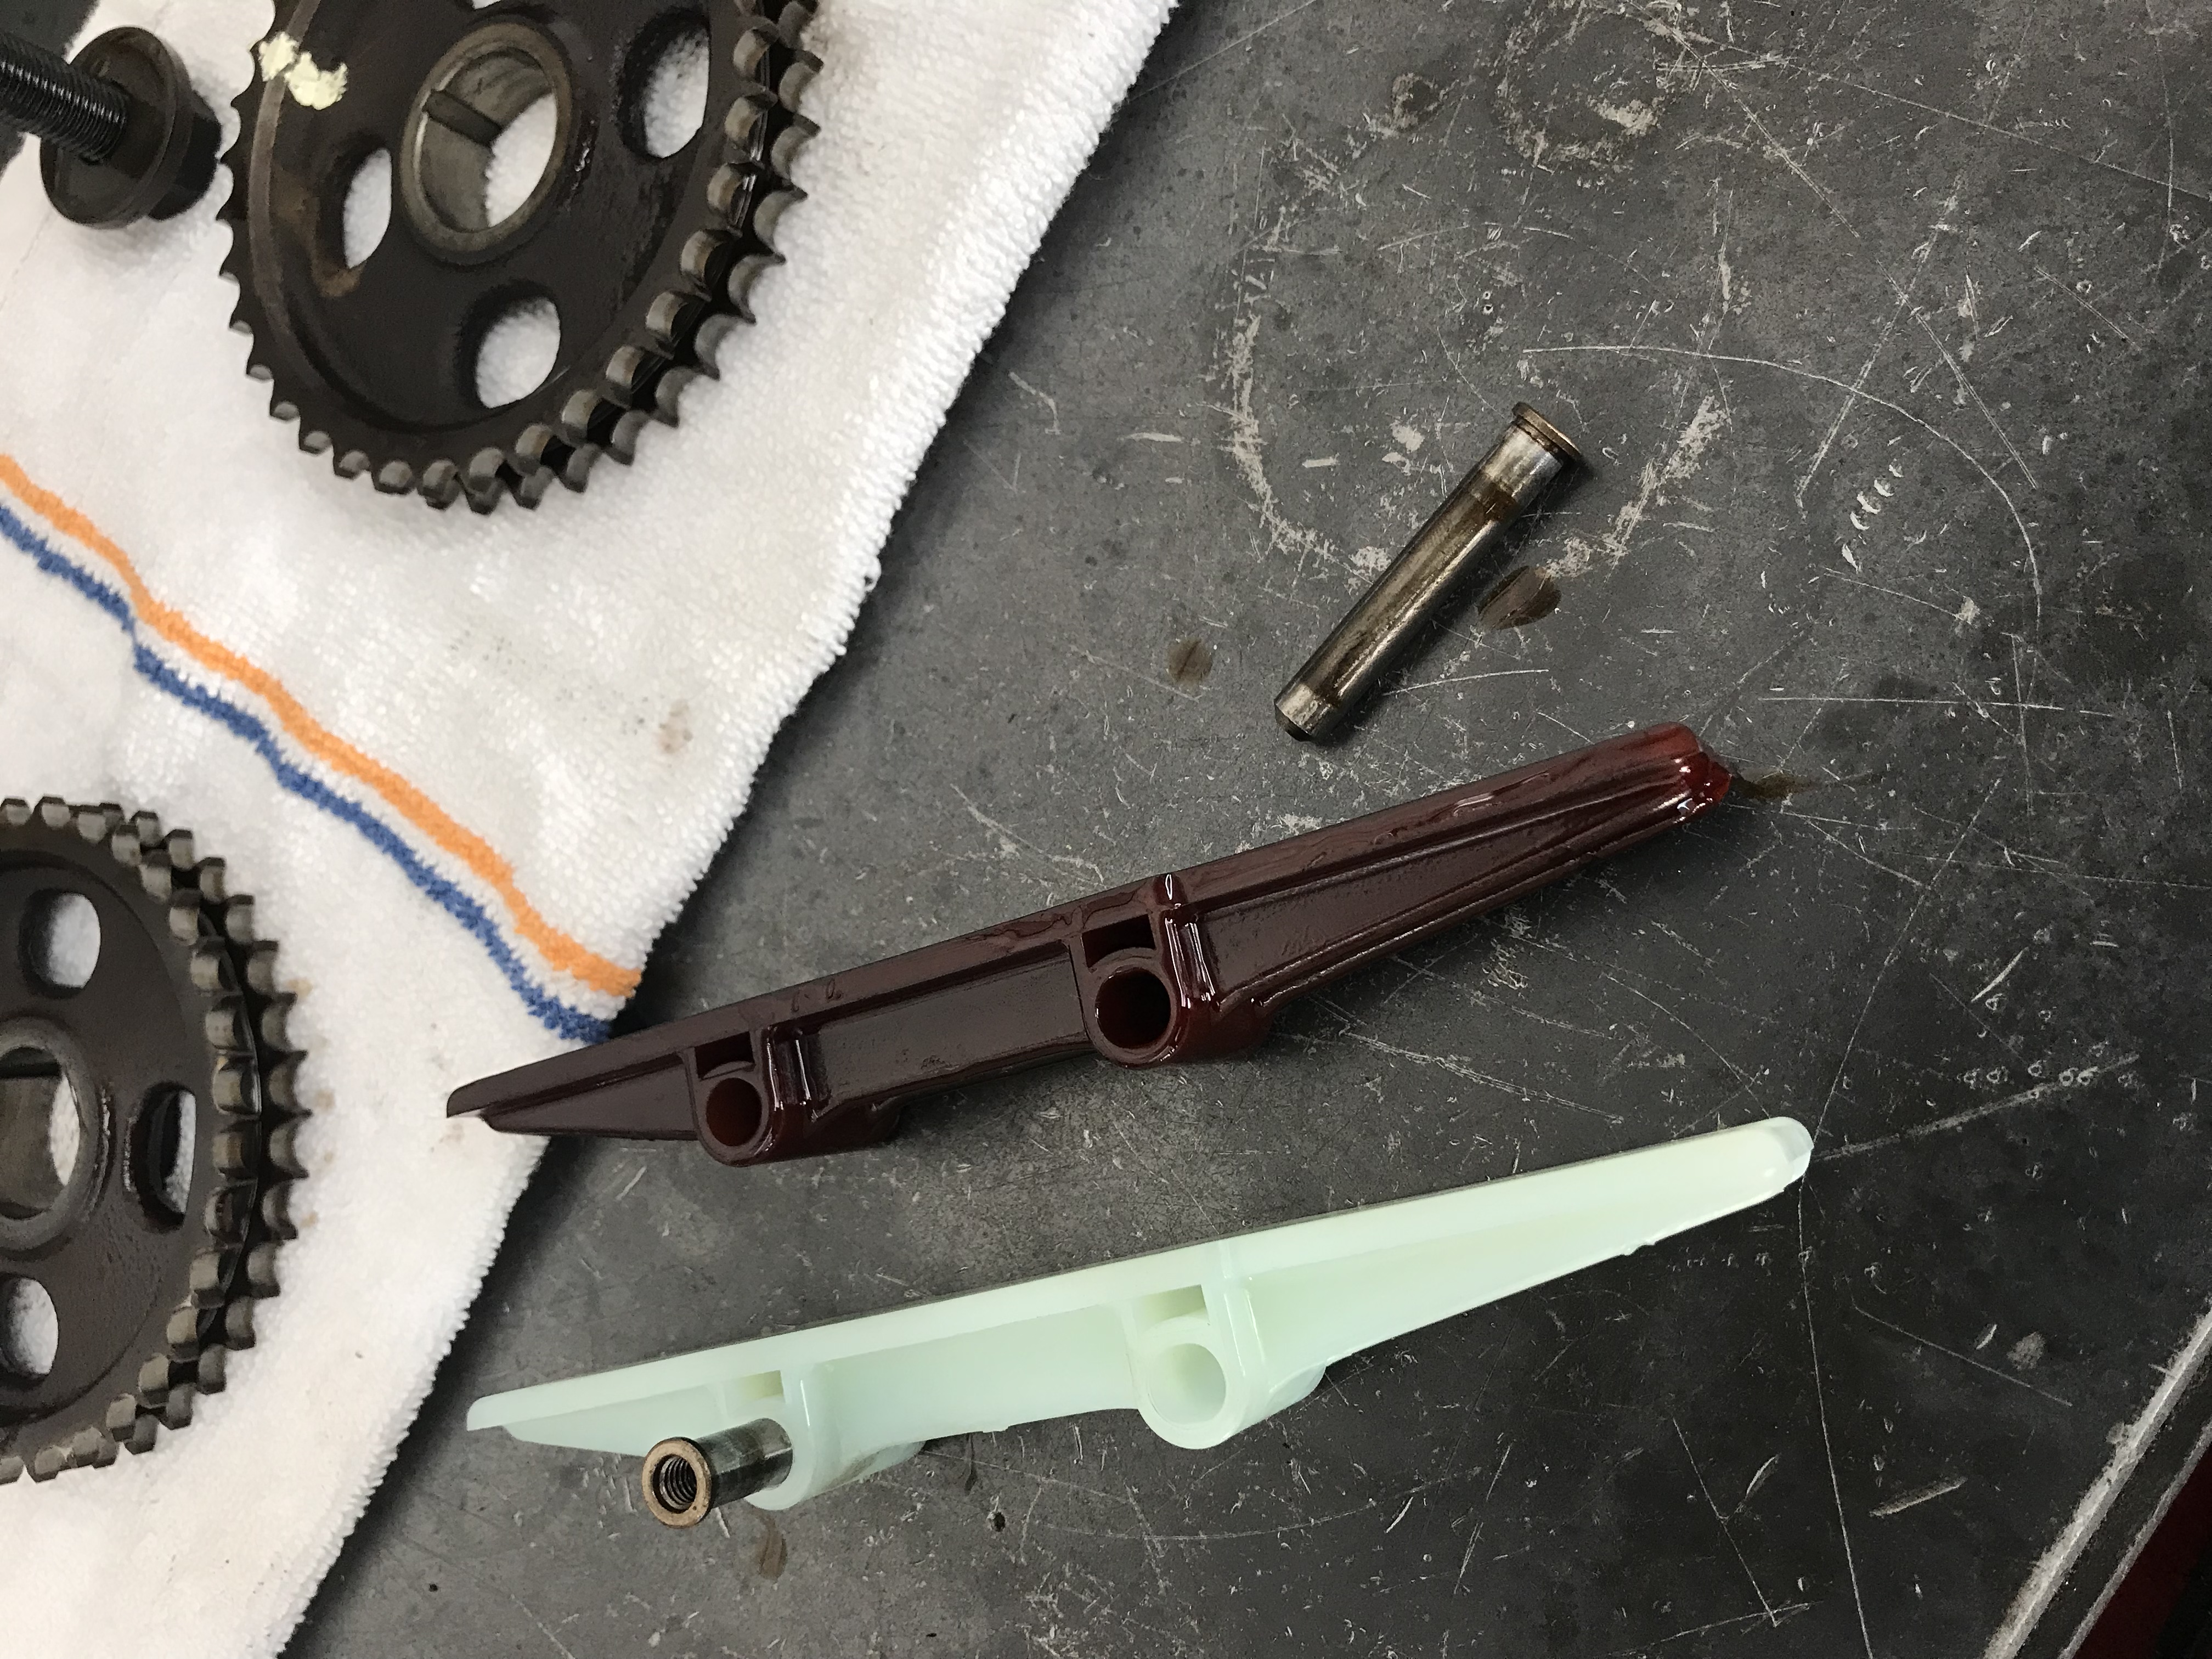 Timing chain guides